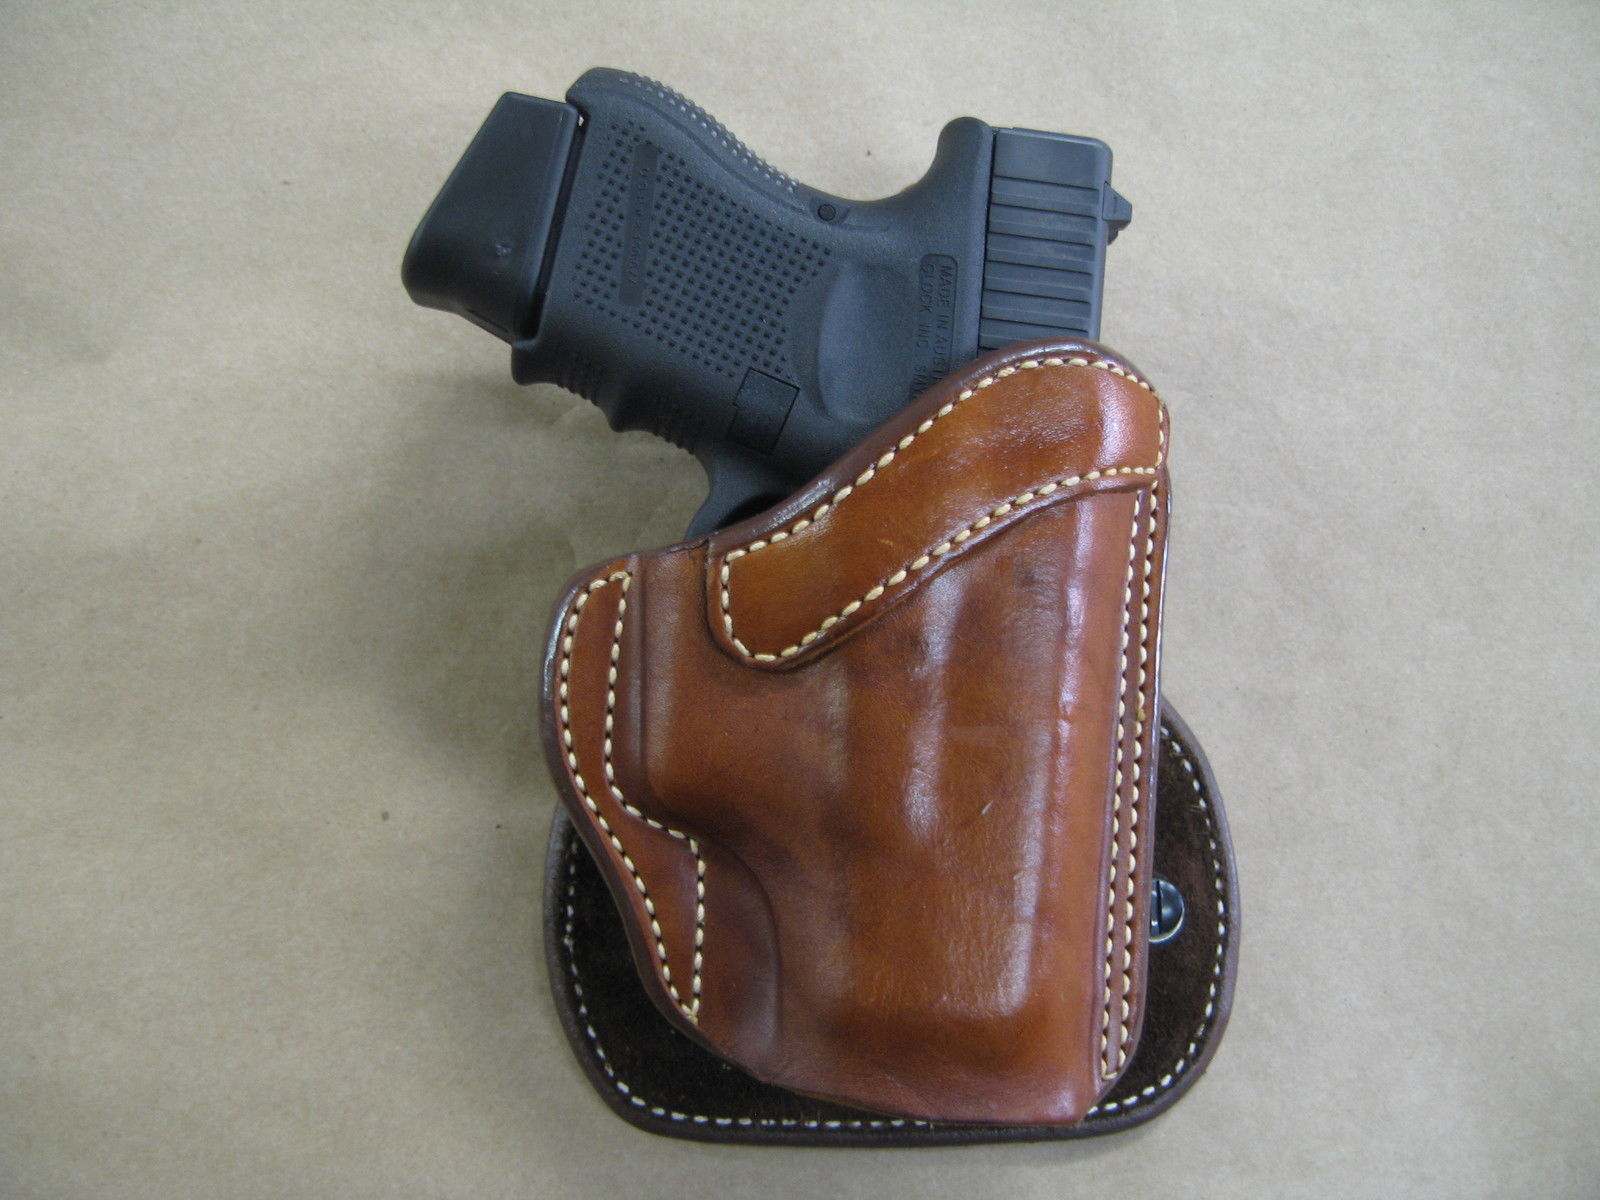 Leather OWB Paddle Holster With Open Top Fits Sig Sauer P6 9mm 3.5" BBL #1395# 